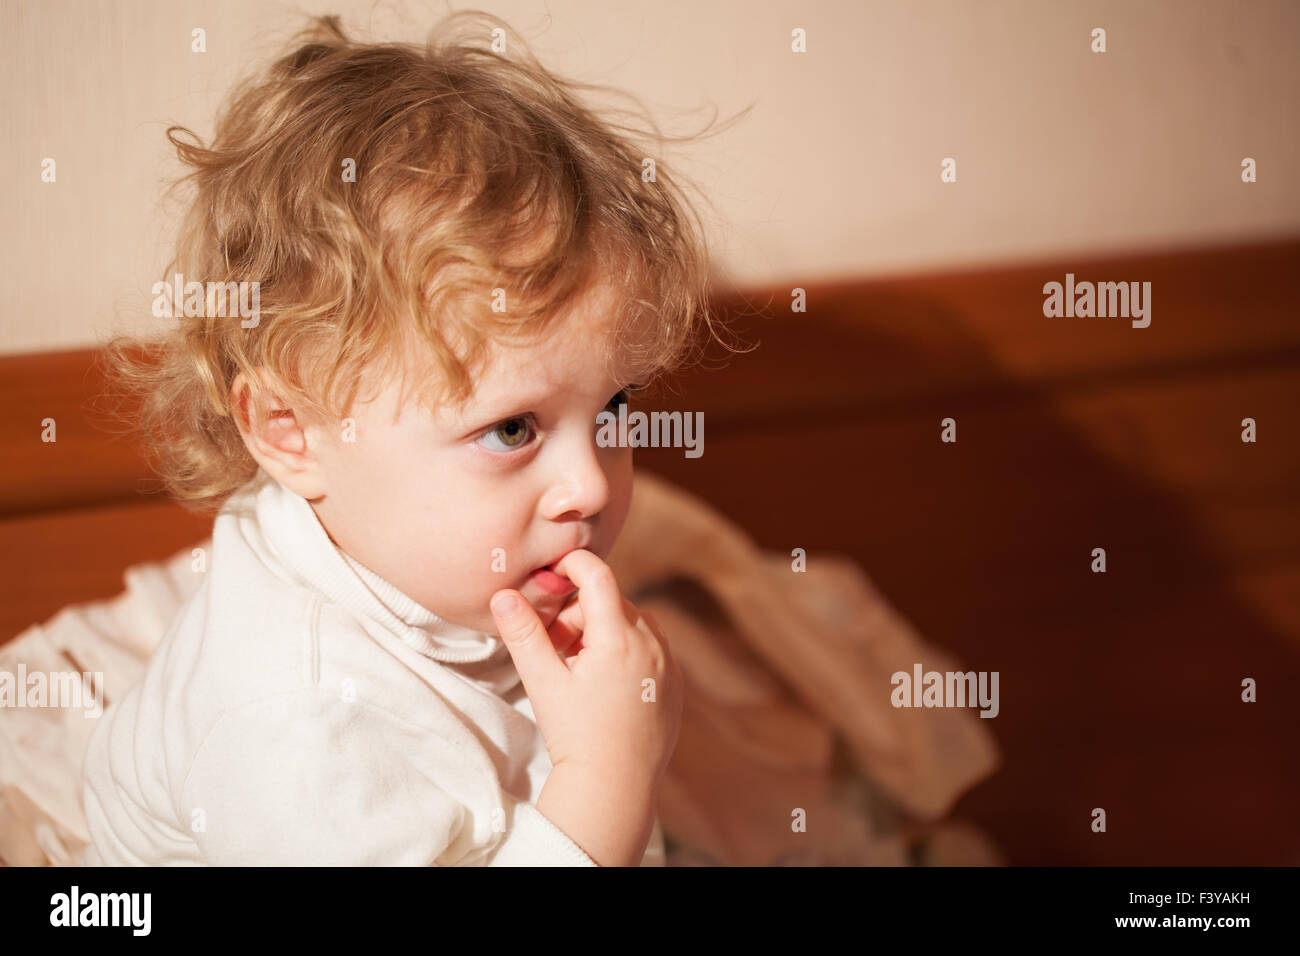 Adorable thoughtful little child Stock Photo